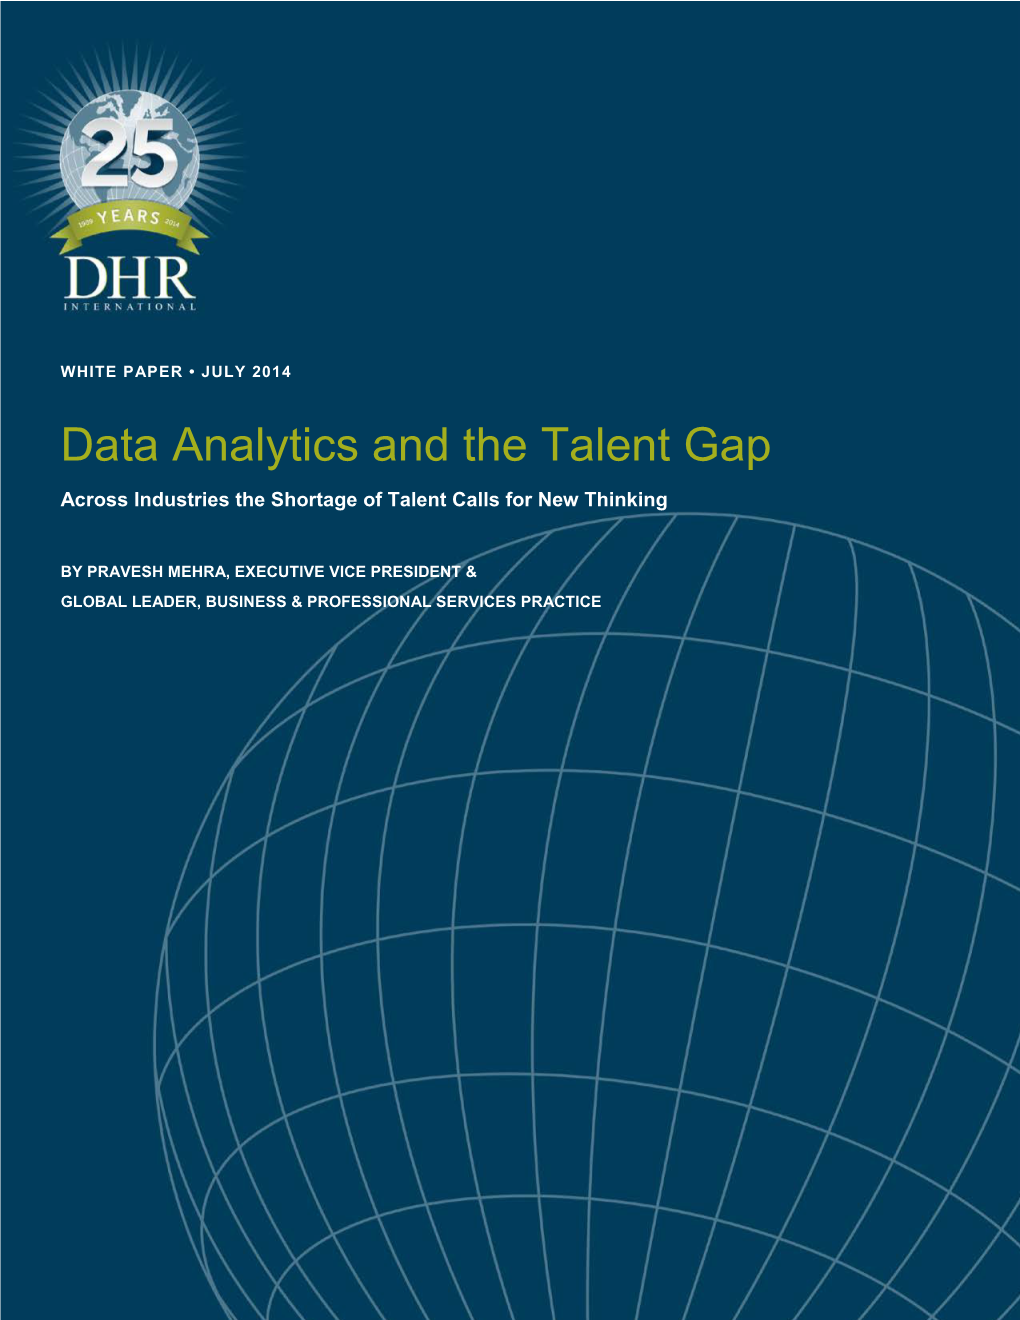 Data Analytics and the Talent Gap Across Industries the Shortage of Talent Calls for New Thinking